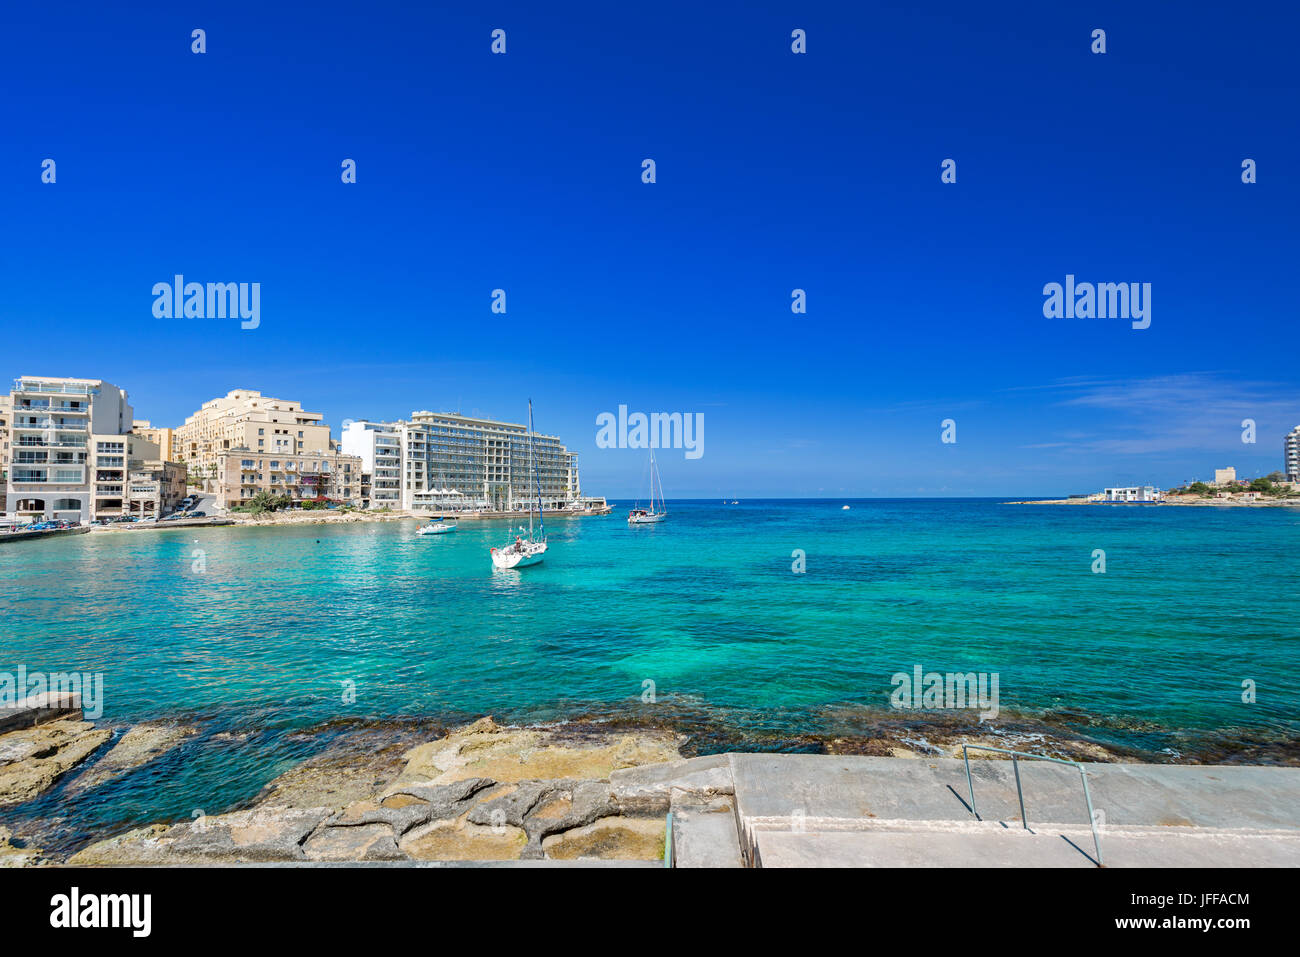 Harbour with yachts Stock Photo